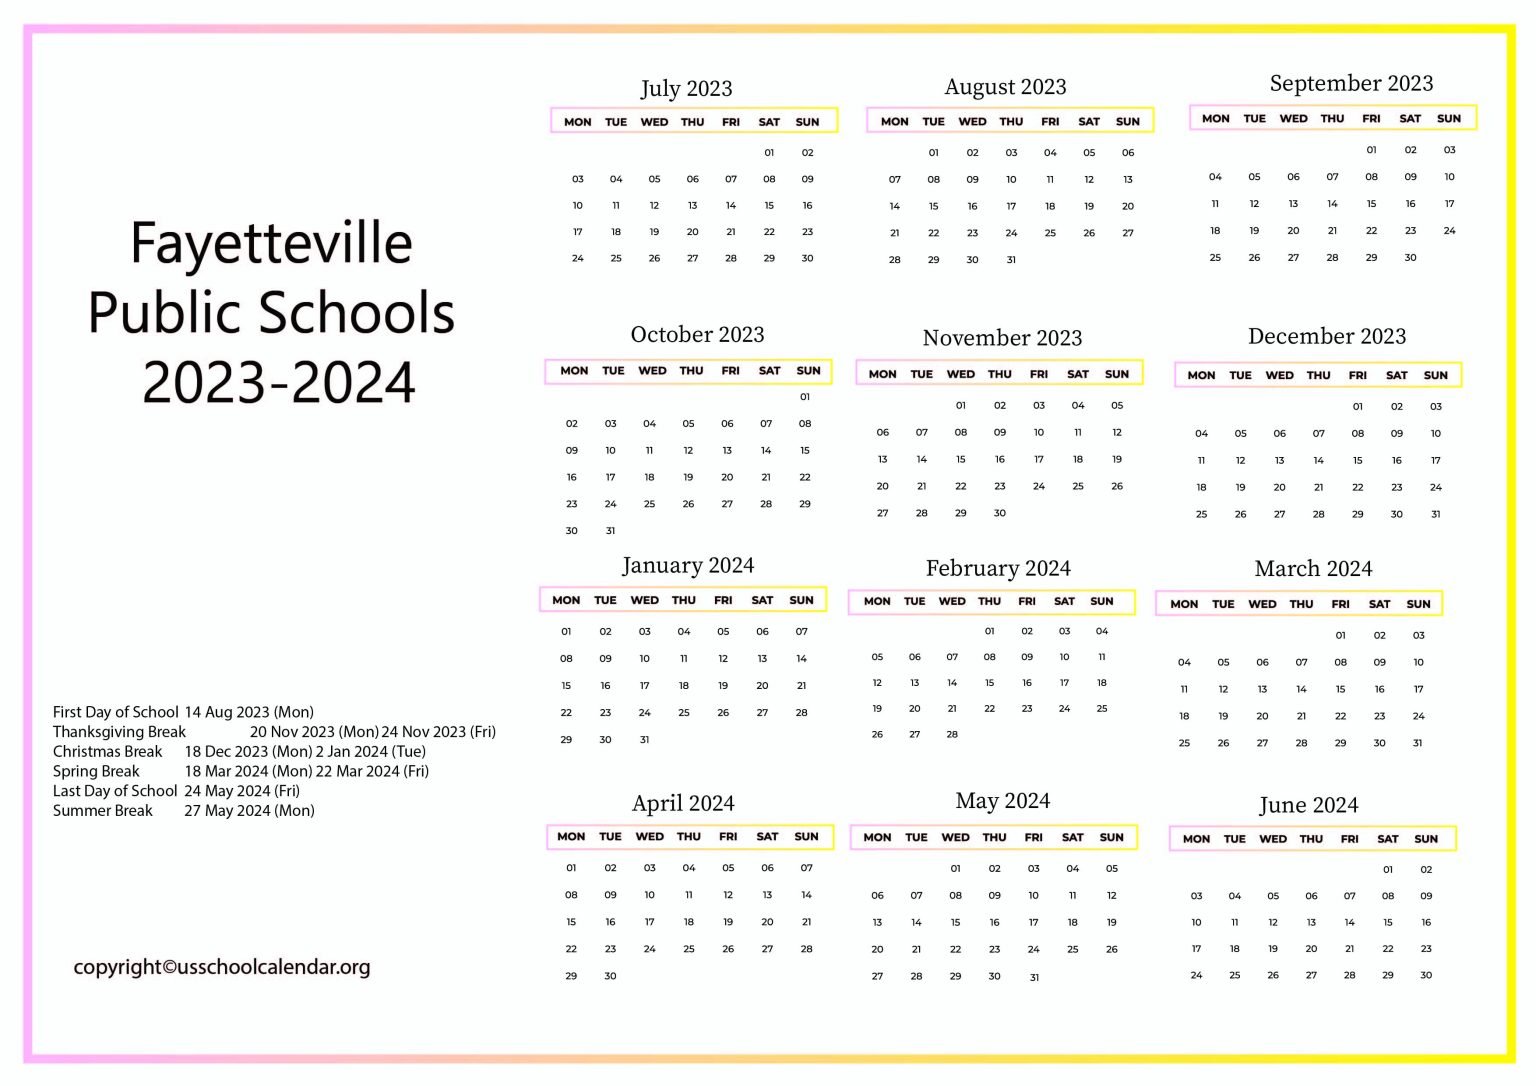 Fayetteville Public Schools Calendar with Holidays 2023 2024